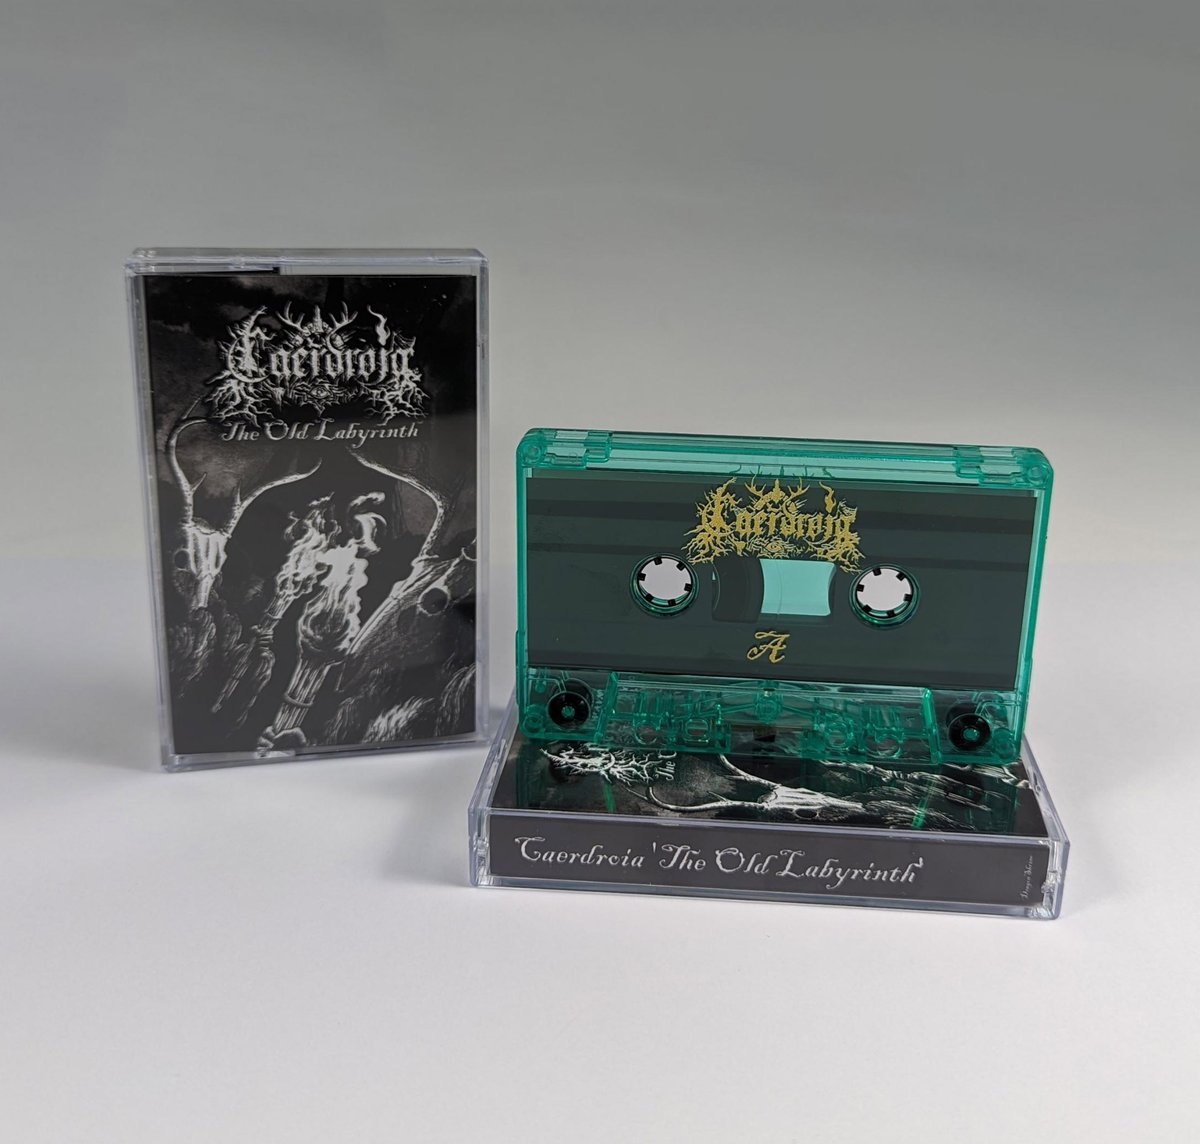 First physical thing I've released in a while!
My other project, Caerdroia, has ltd tapes available now.
For fans of #dungeonsynth #darkambient and creepy #folkhorror vibes